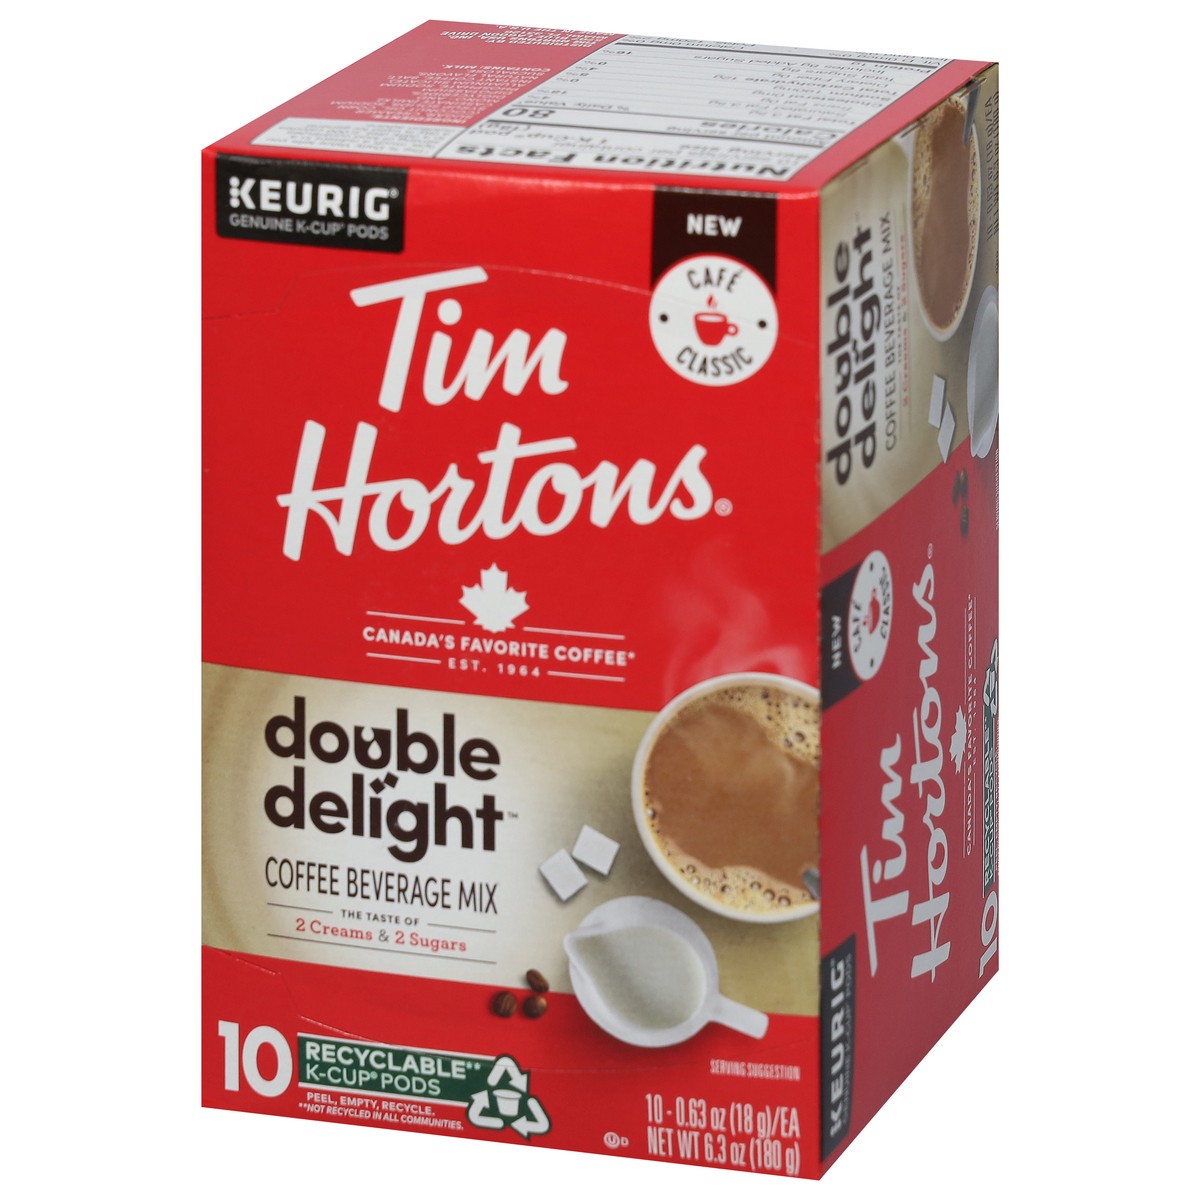 A Double Double™ you can eat! Introducing the new Tim Hortons Double  Double™ Coffee Bar